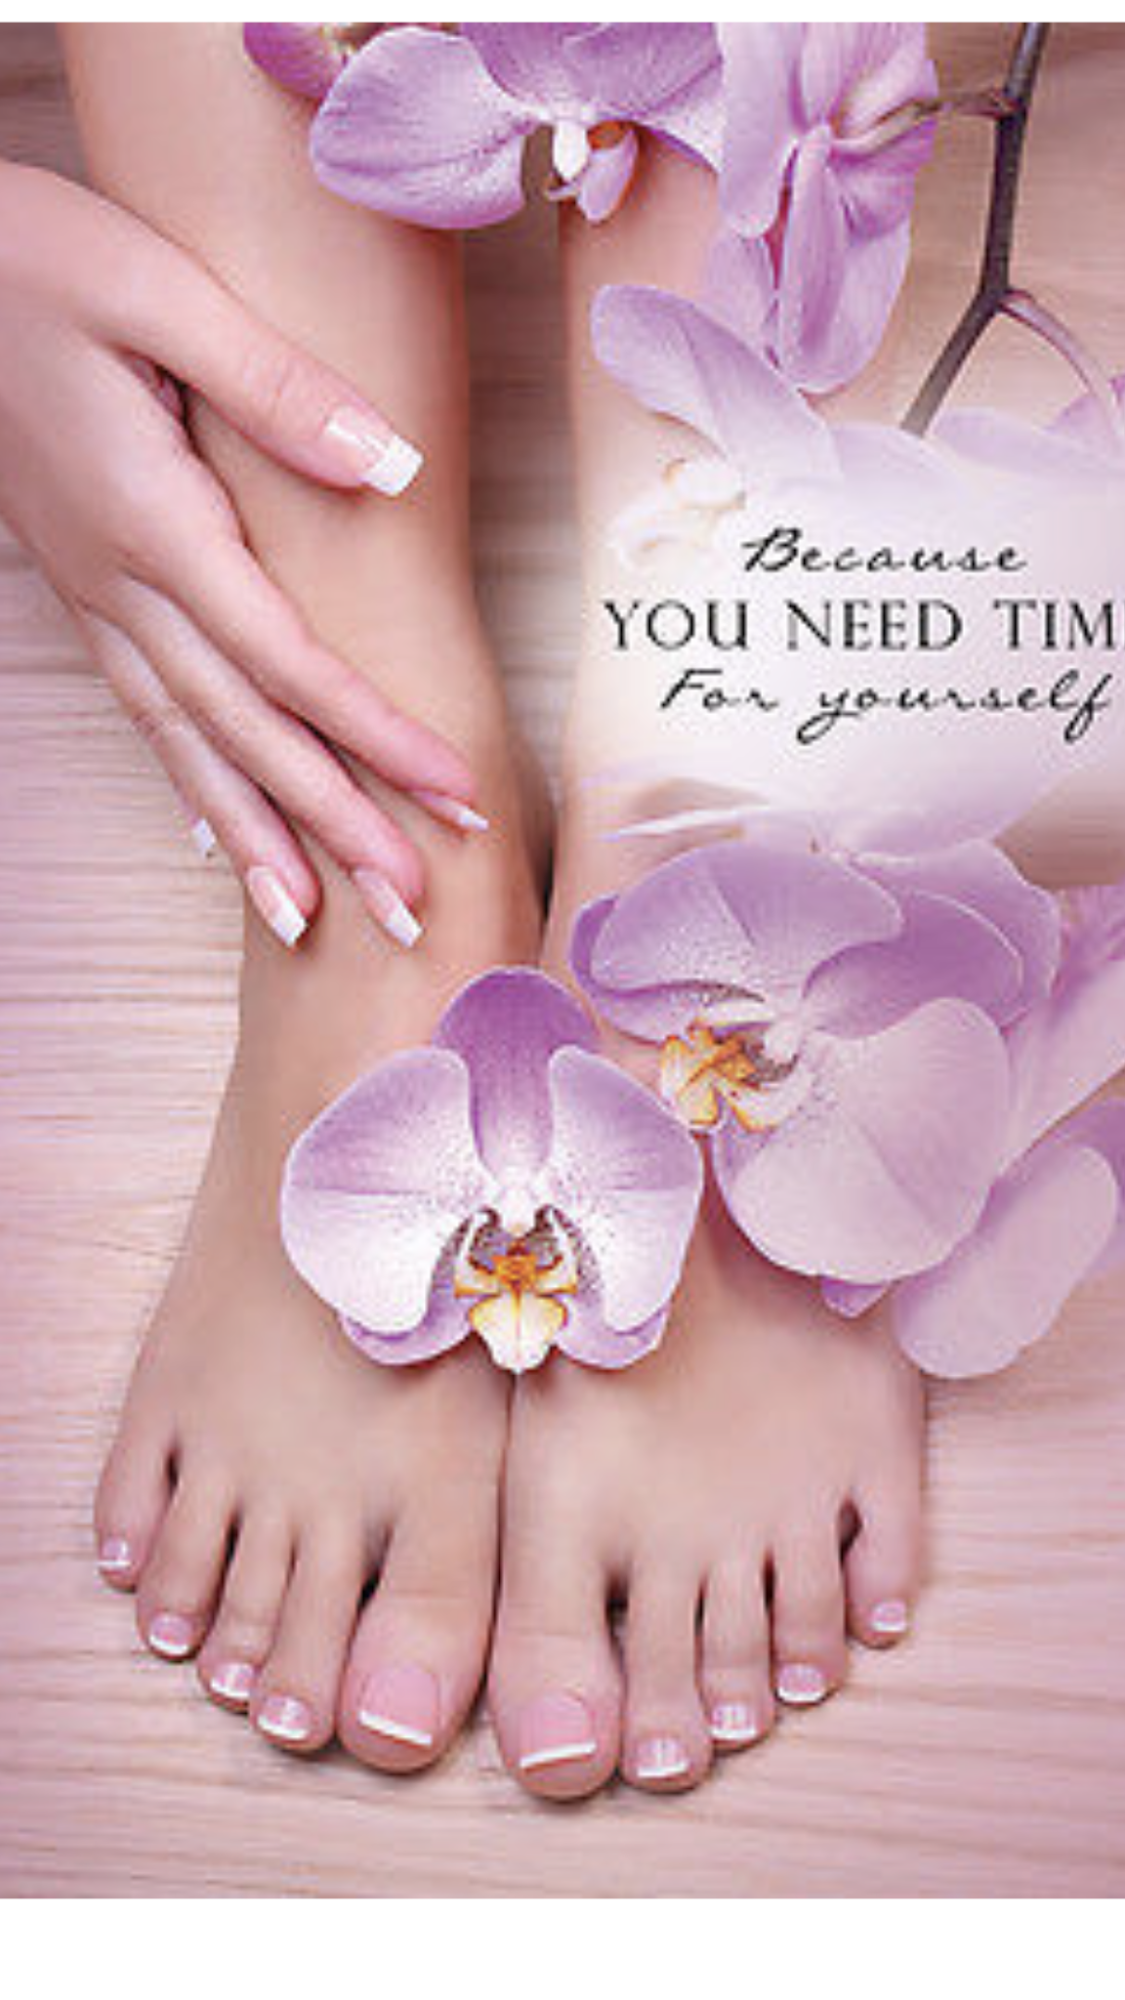 Beauty One Nails and Spa